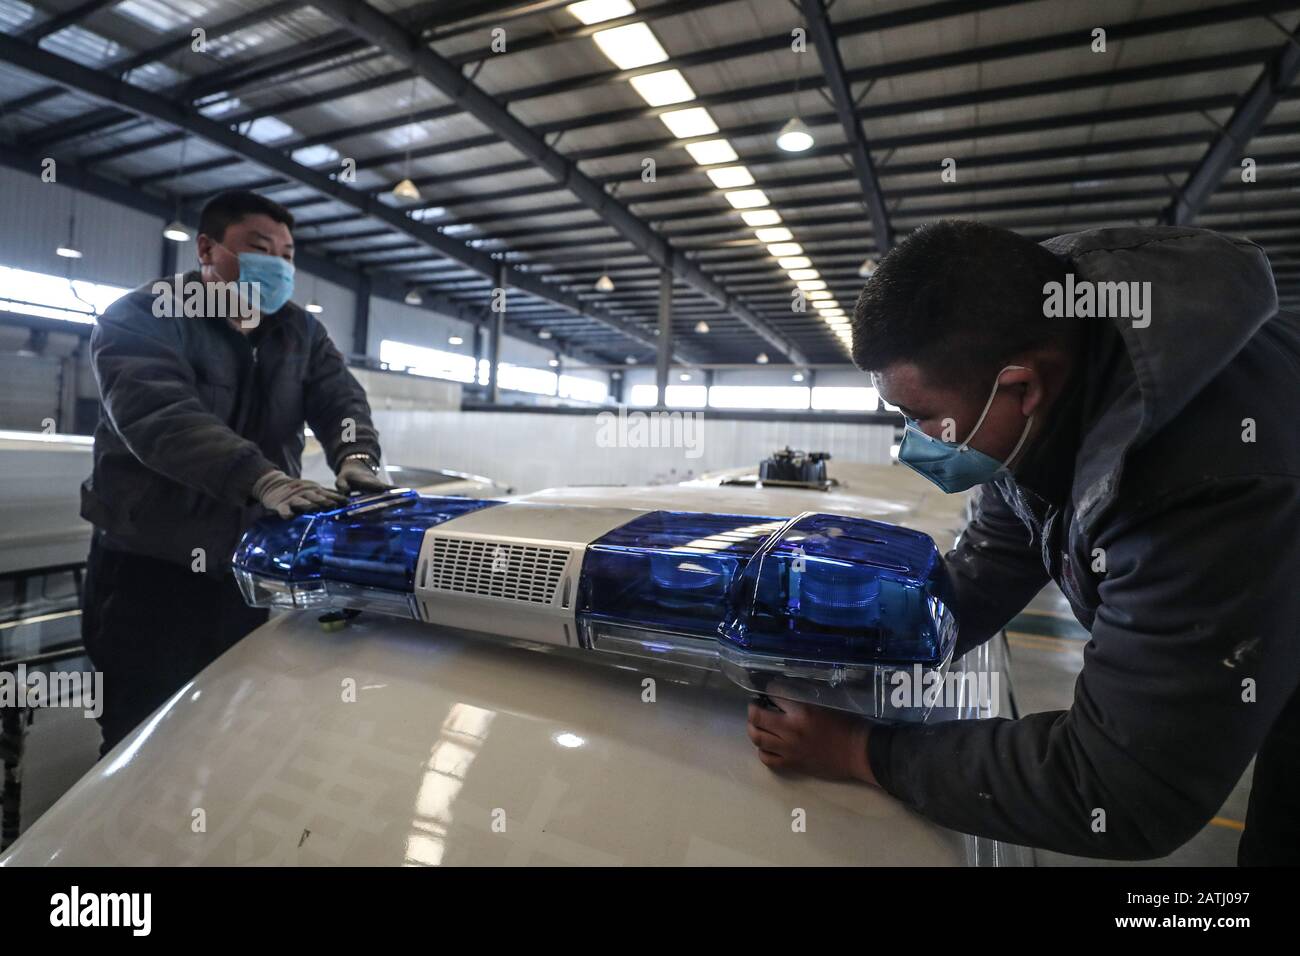 (200203) -- SHENYANG, Feb. 3, 2020 (Xinhua) -- Workers produce ambulance at the manufacturing base of the Brilliance Auto company in Shenyang, northeast China's Liaoning Province, Feb. 3, 2020. In recent days, the company has rushed to produce negative pressure ambulances for the fight against the novel coronavirus epidemic. The production of the first batch of 10 negative pressure ambulances will be completed on Feb. 5 and then put into use. (Xinhua/Pan Yulong) Stock Photo